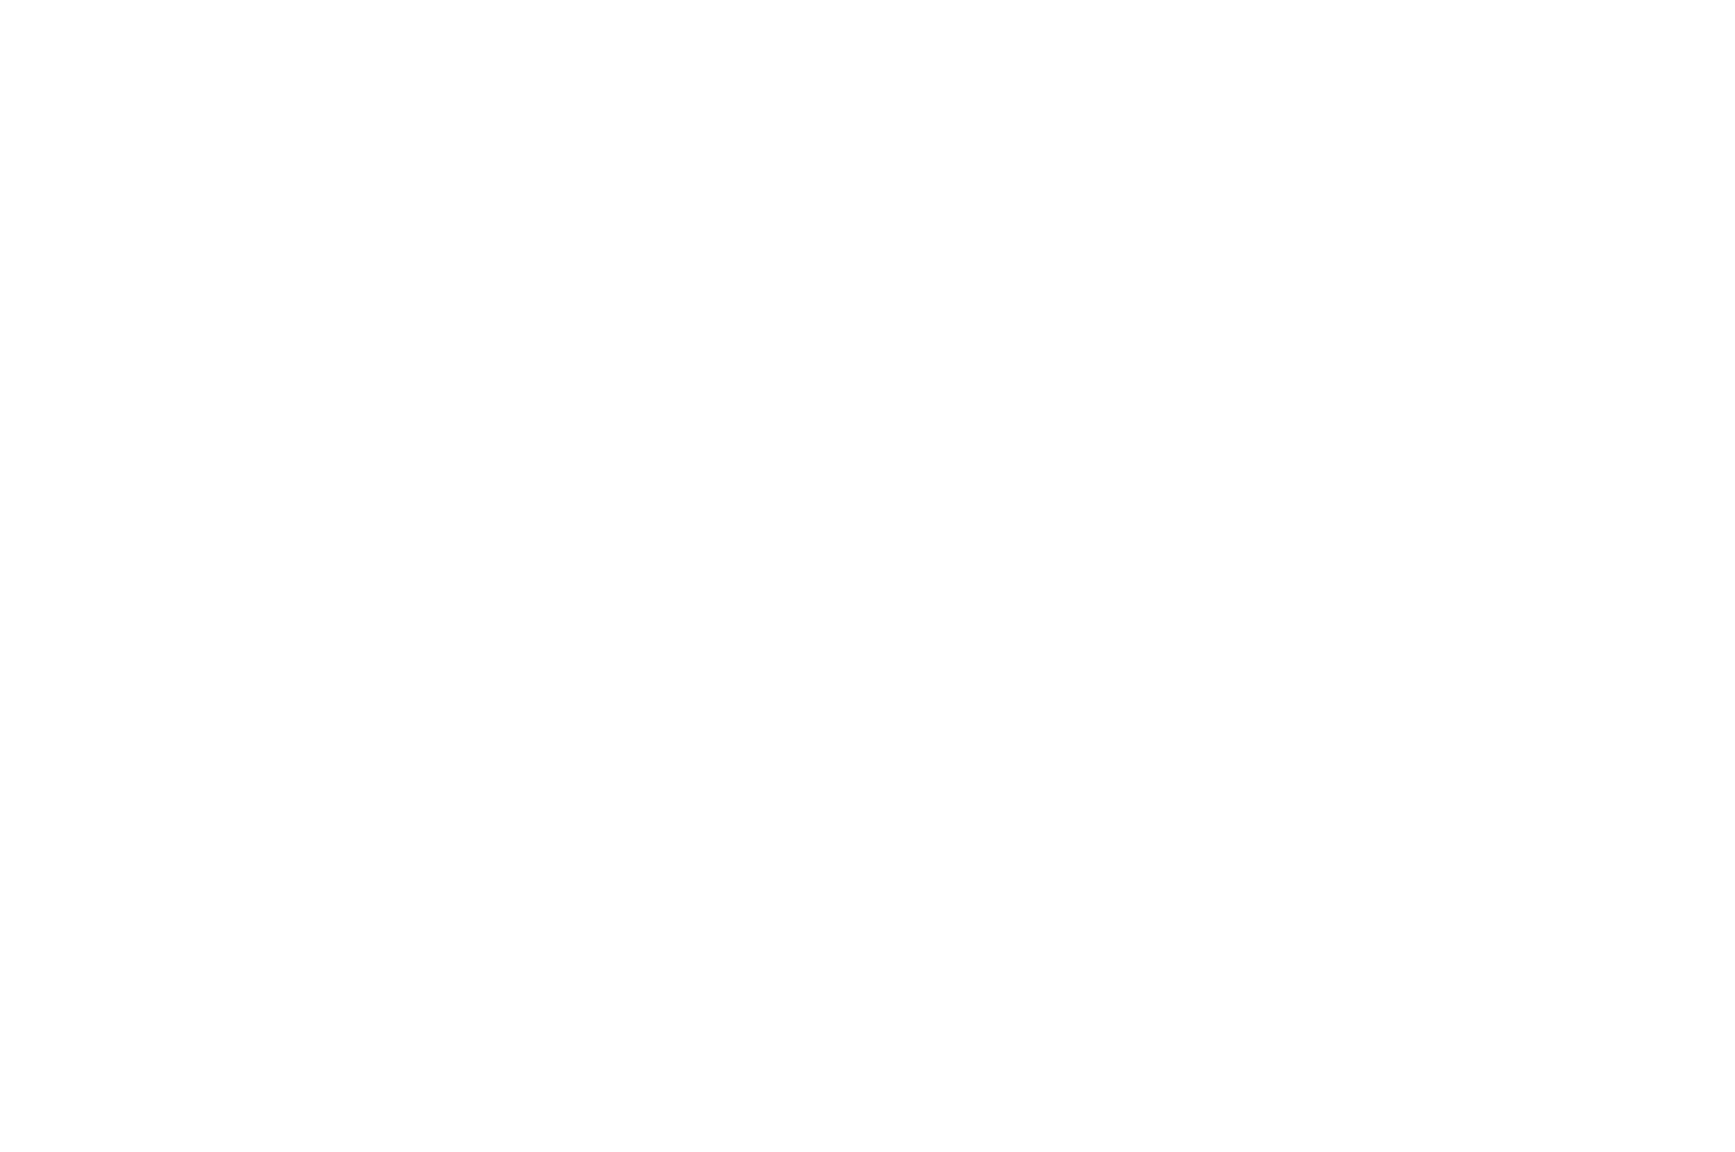 OFFICIAL SELECTION - AUCKLAND INTERNATIONAL FILM FESTIVAL  - 2016 (2).png